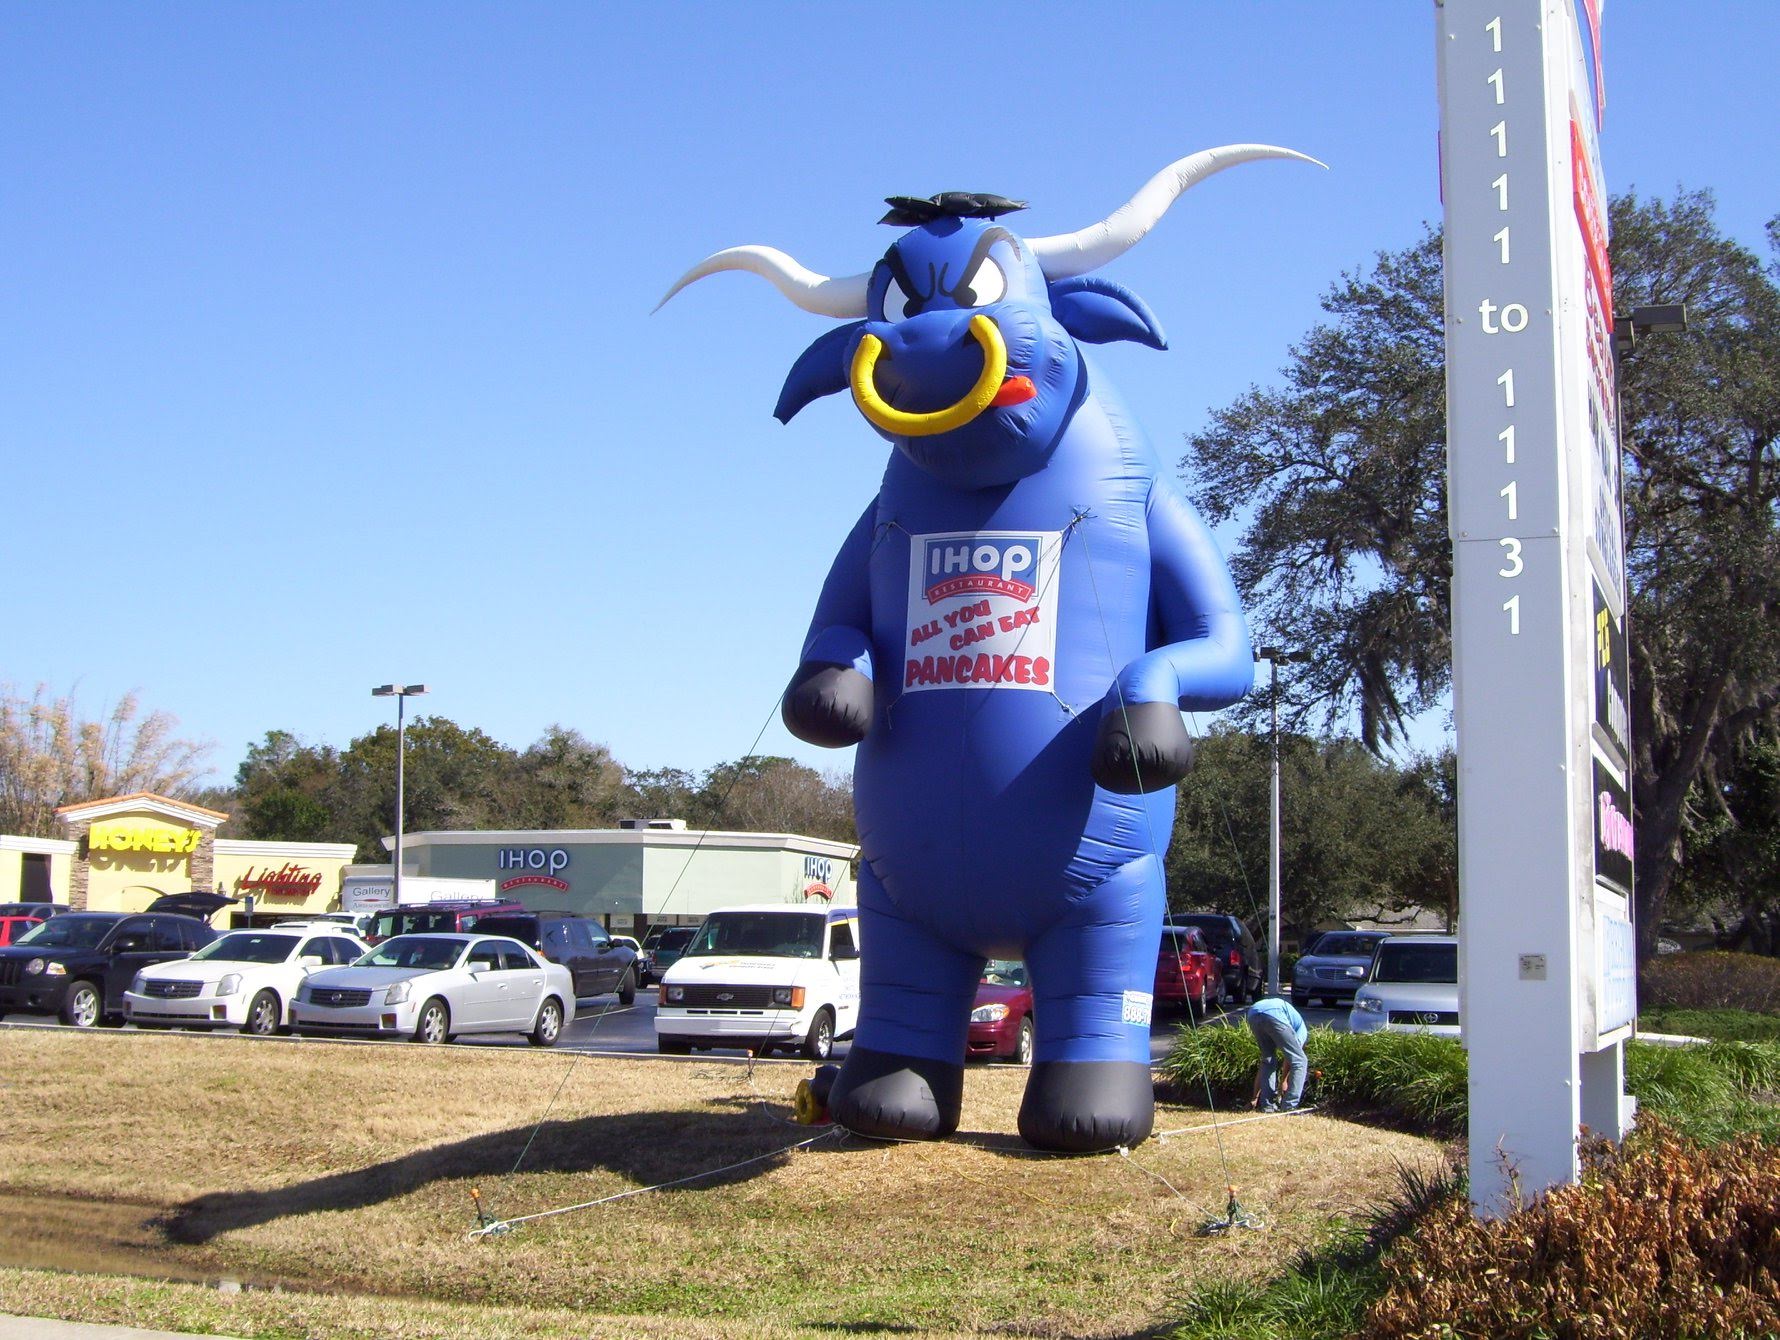 Custom banner on inflatable bull rental by Giant Promotions - perfect for events.